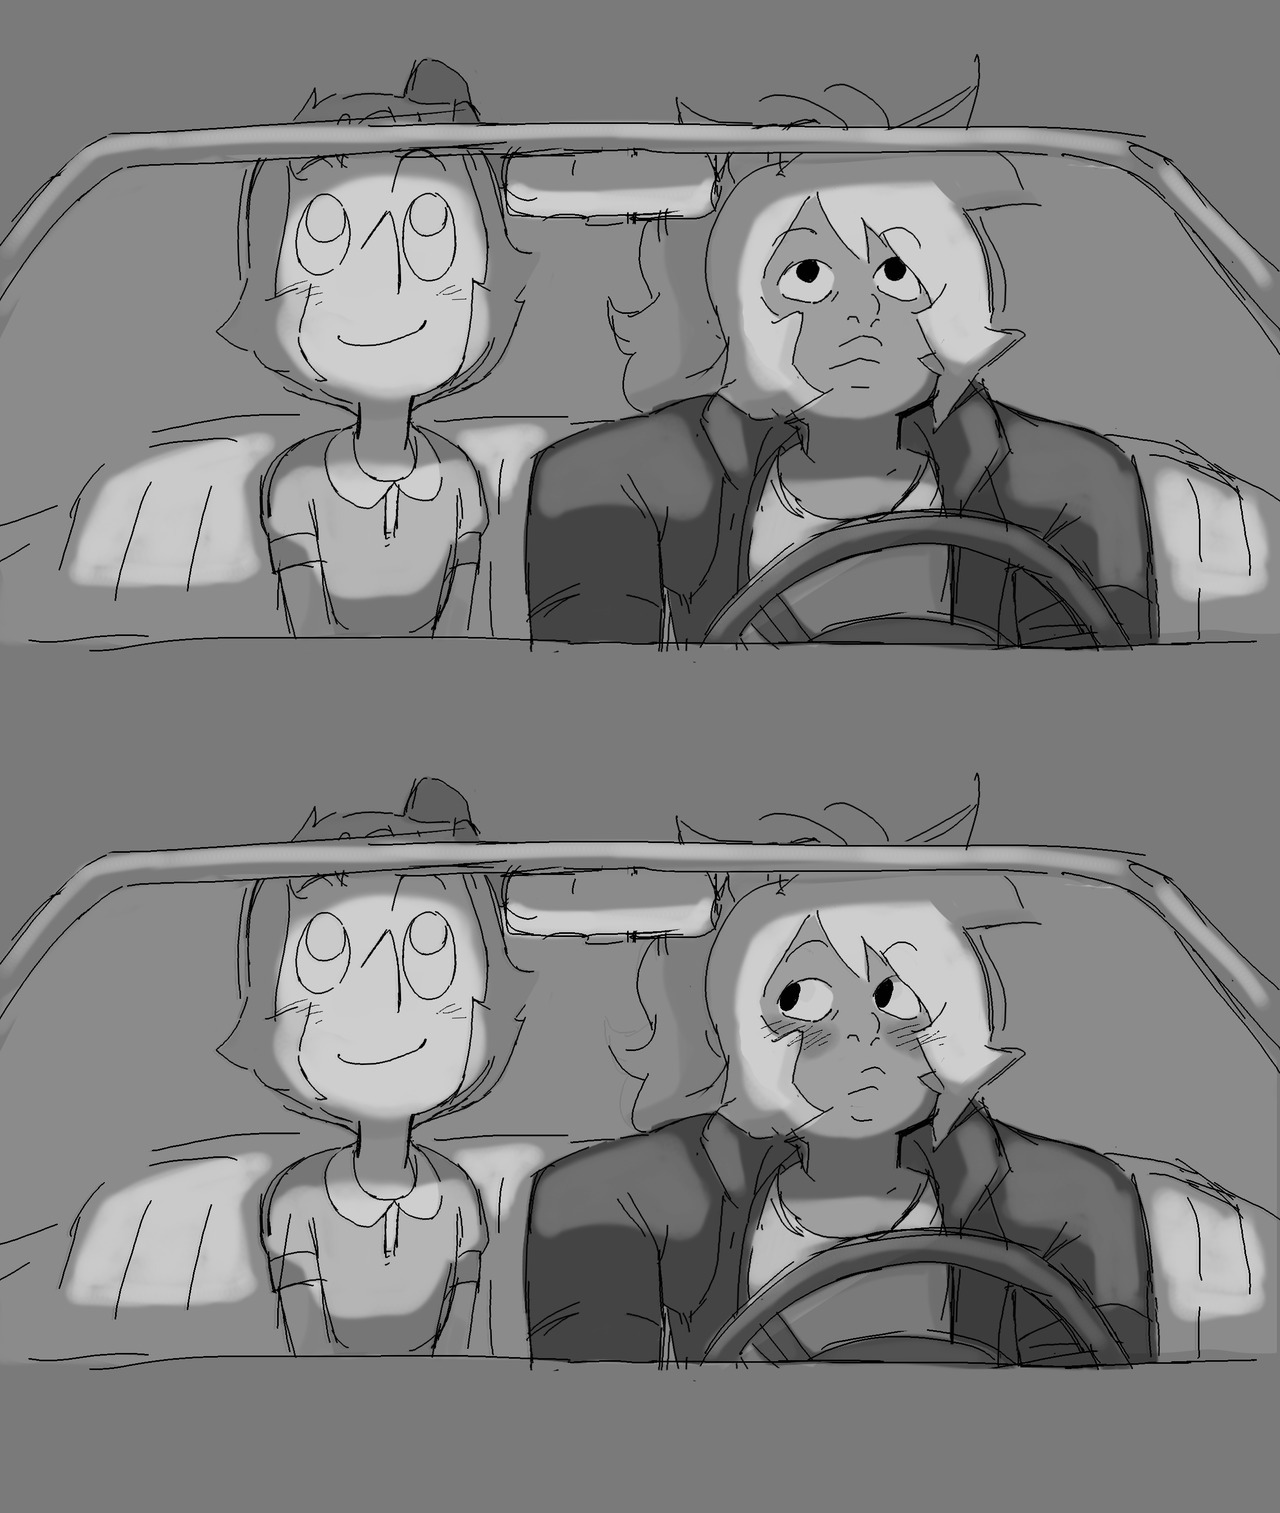 Grease AU? Amethyst trying to be smooth at a drive in cinema